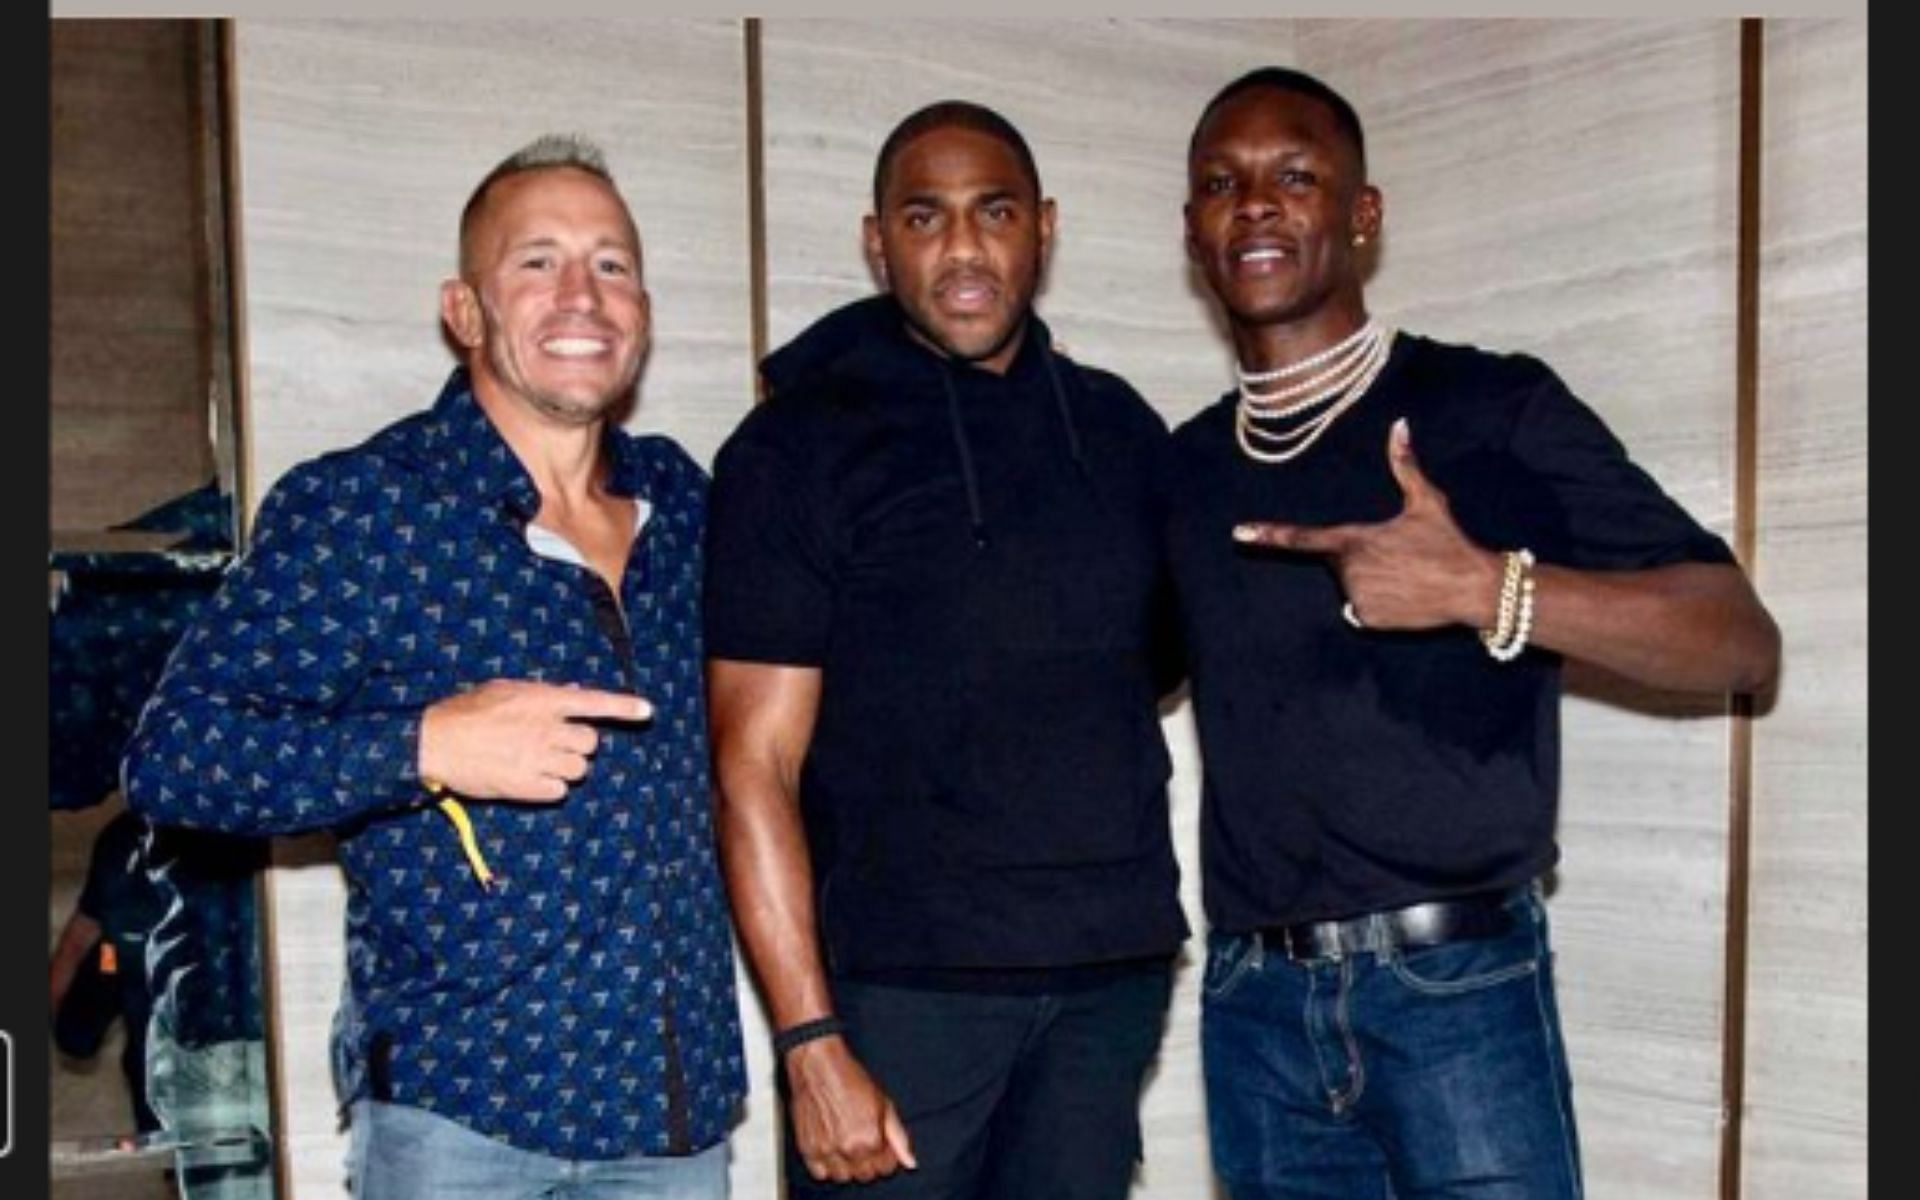 Georges St-Pierre (left) and Israel Adesanya (right) [Image courtesy of @georgesstpierre Instagram]